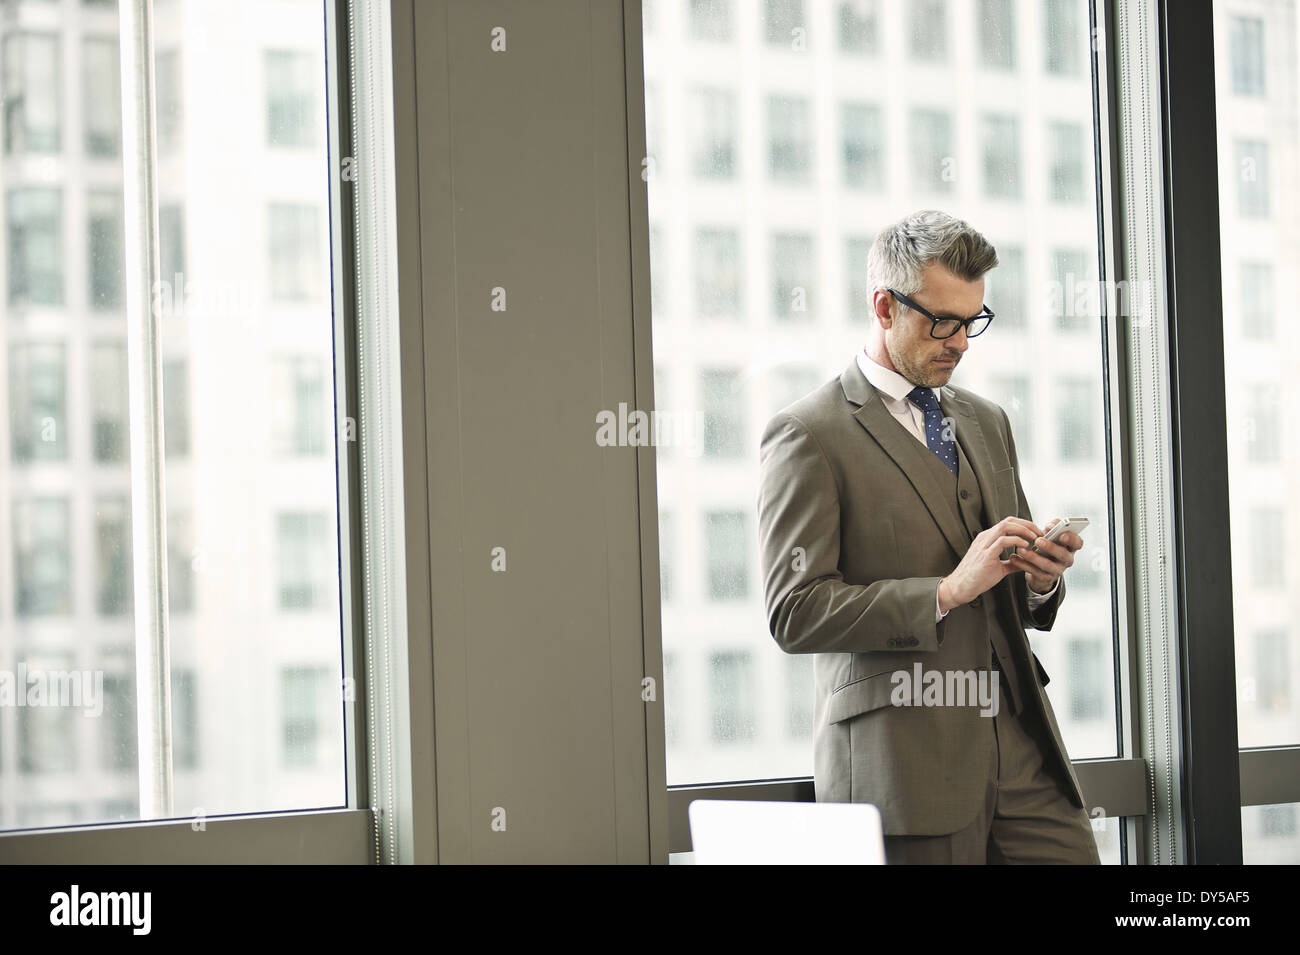 Businessman texting on smartphone in office Stock Photo